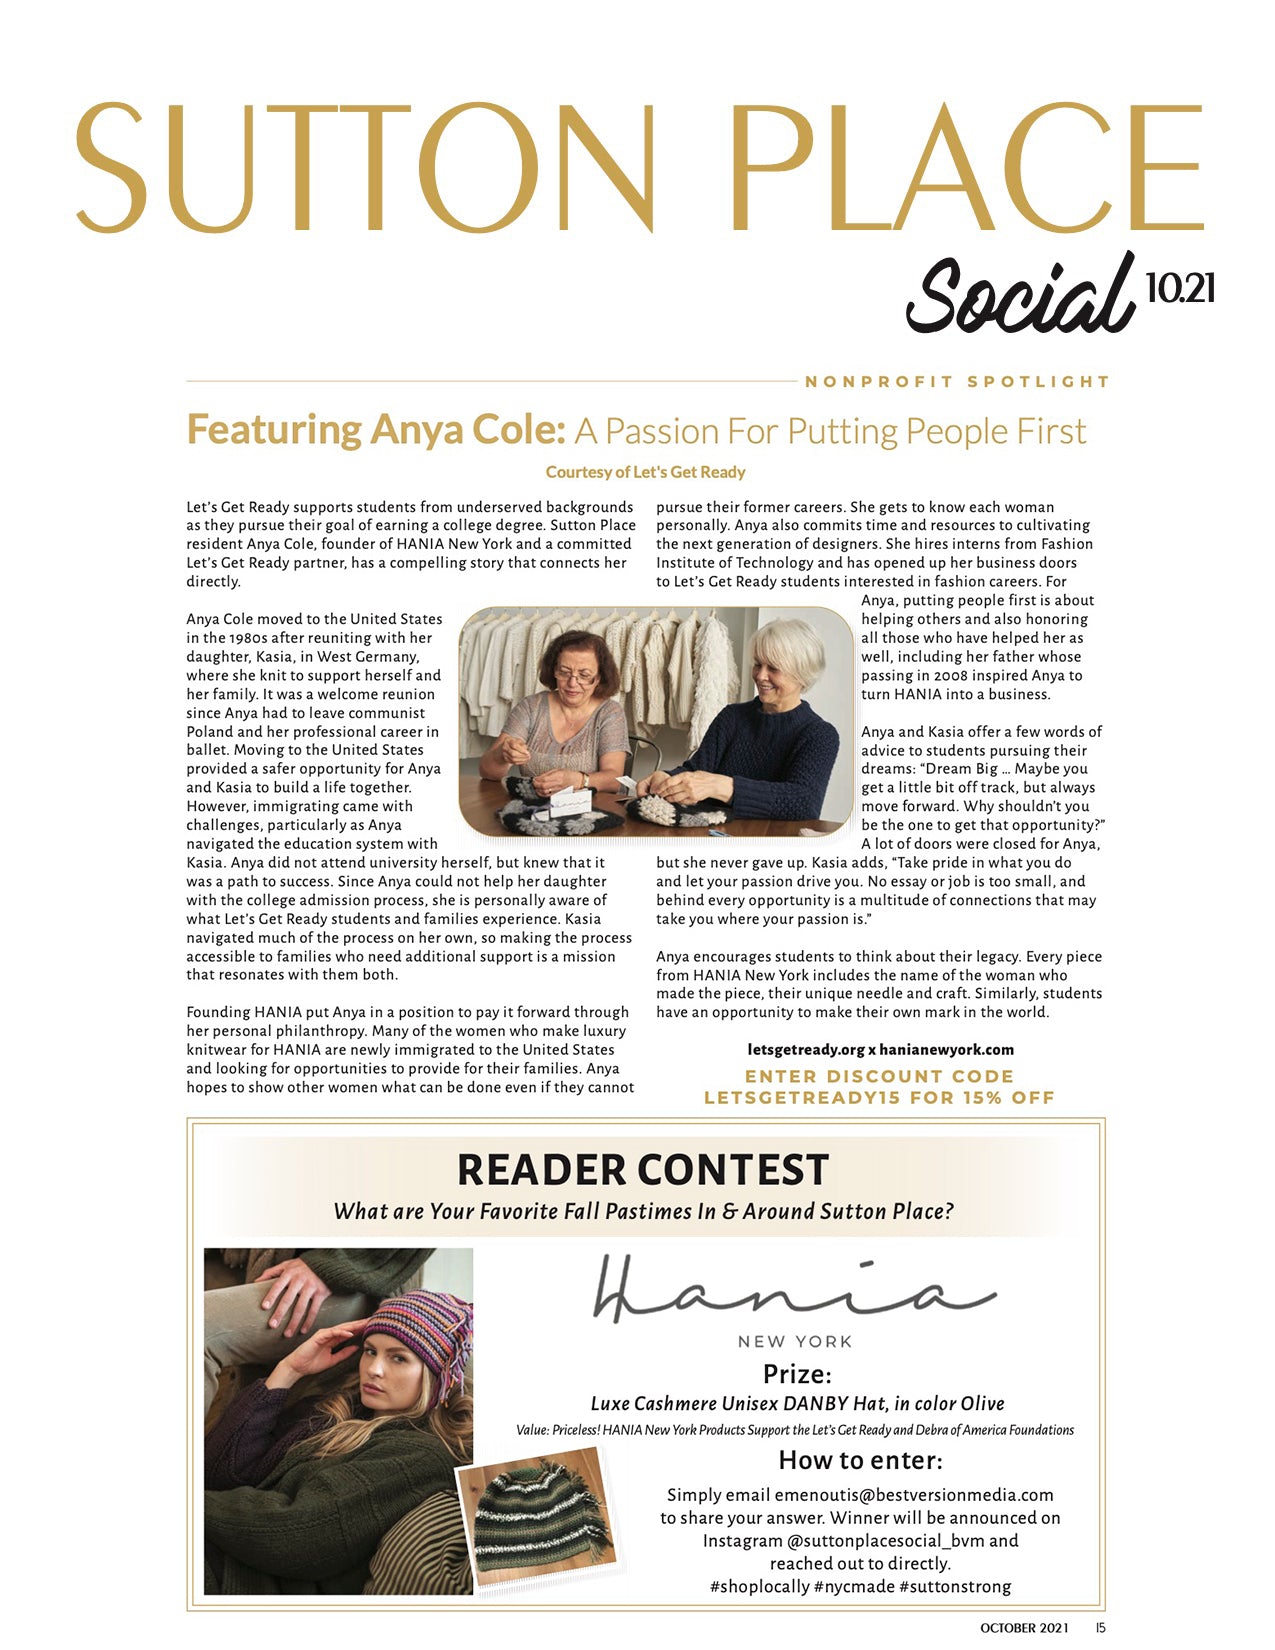 Sutton Place Magazine featuring Hania New York October 2021